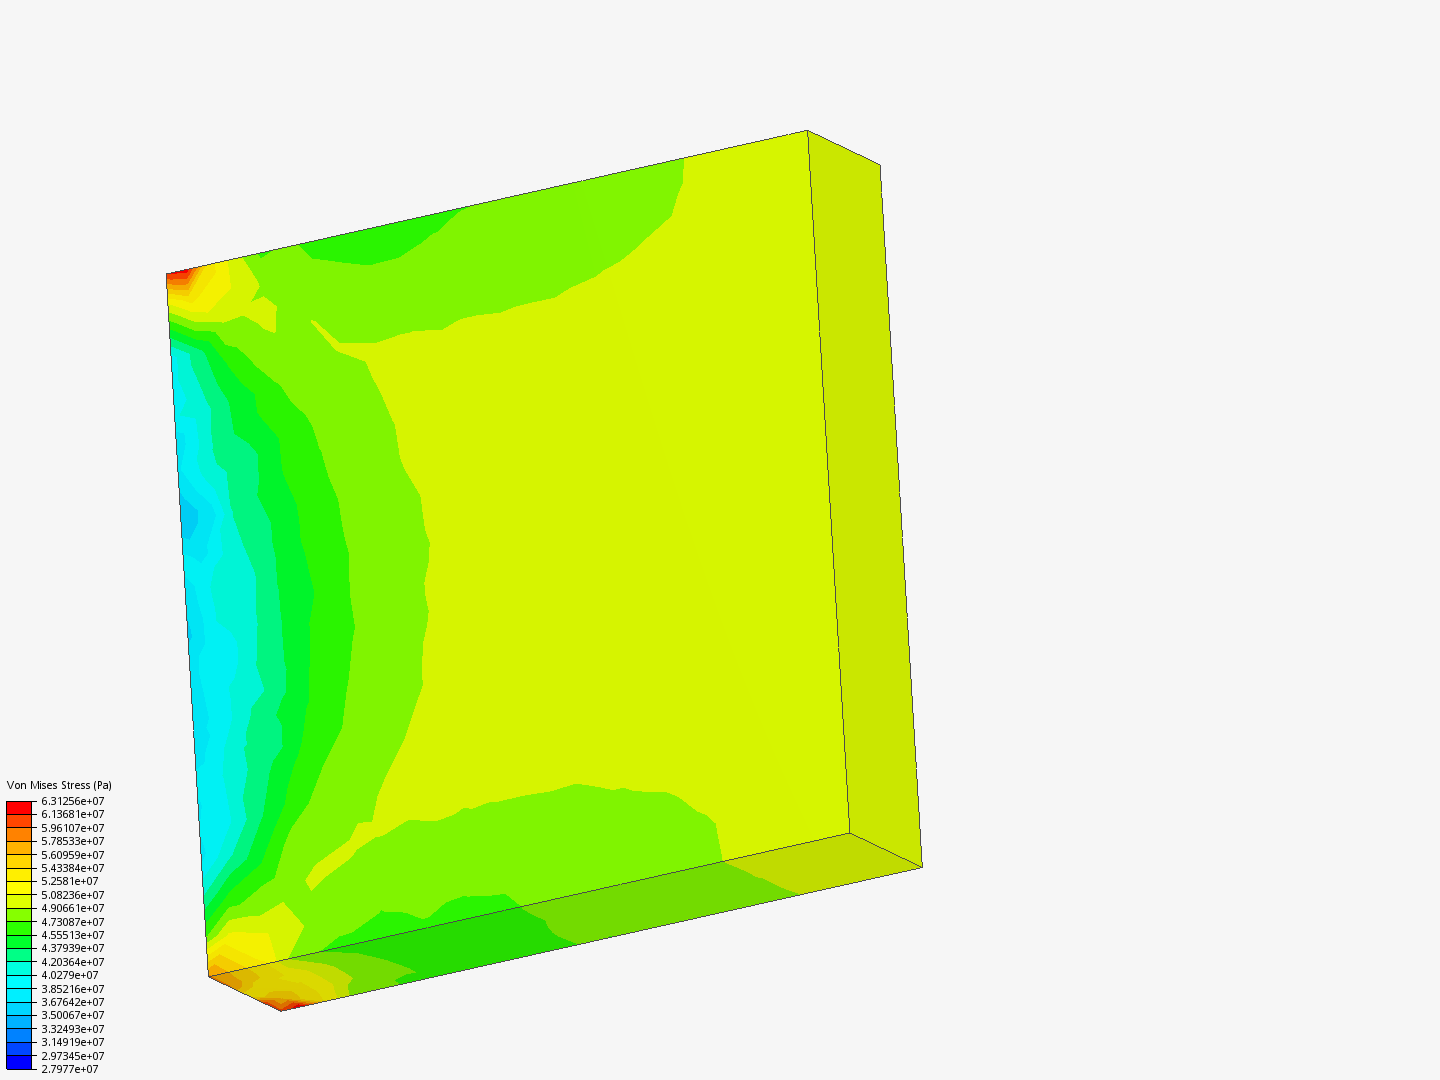 Tutorial 3: Differential casing thermal analysis - Copy image